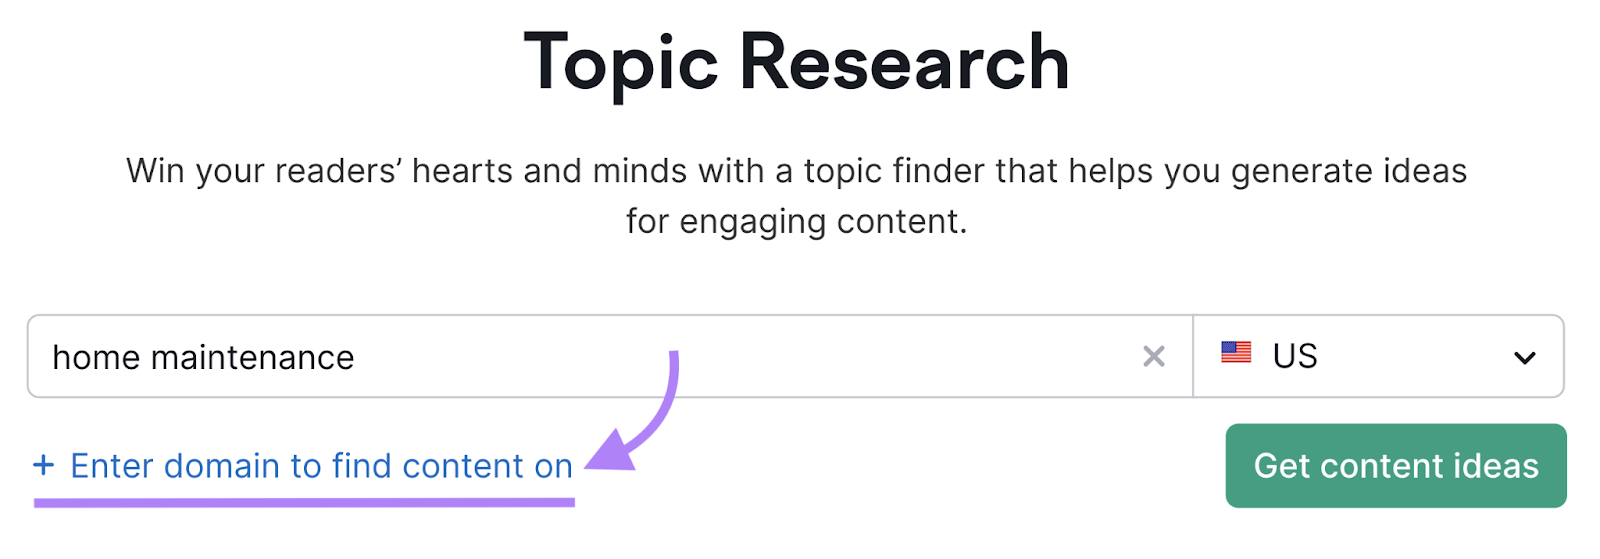 “+ Enter domain to find content on” link shown in Topic Research